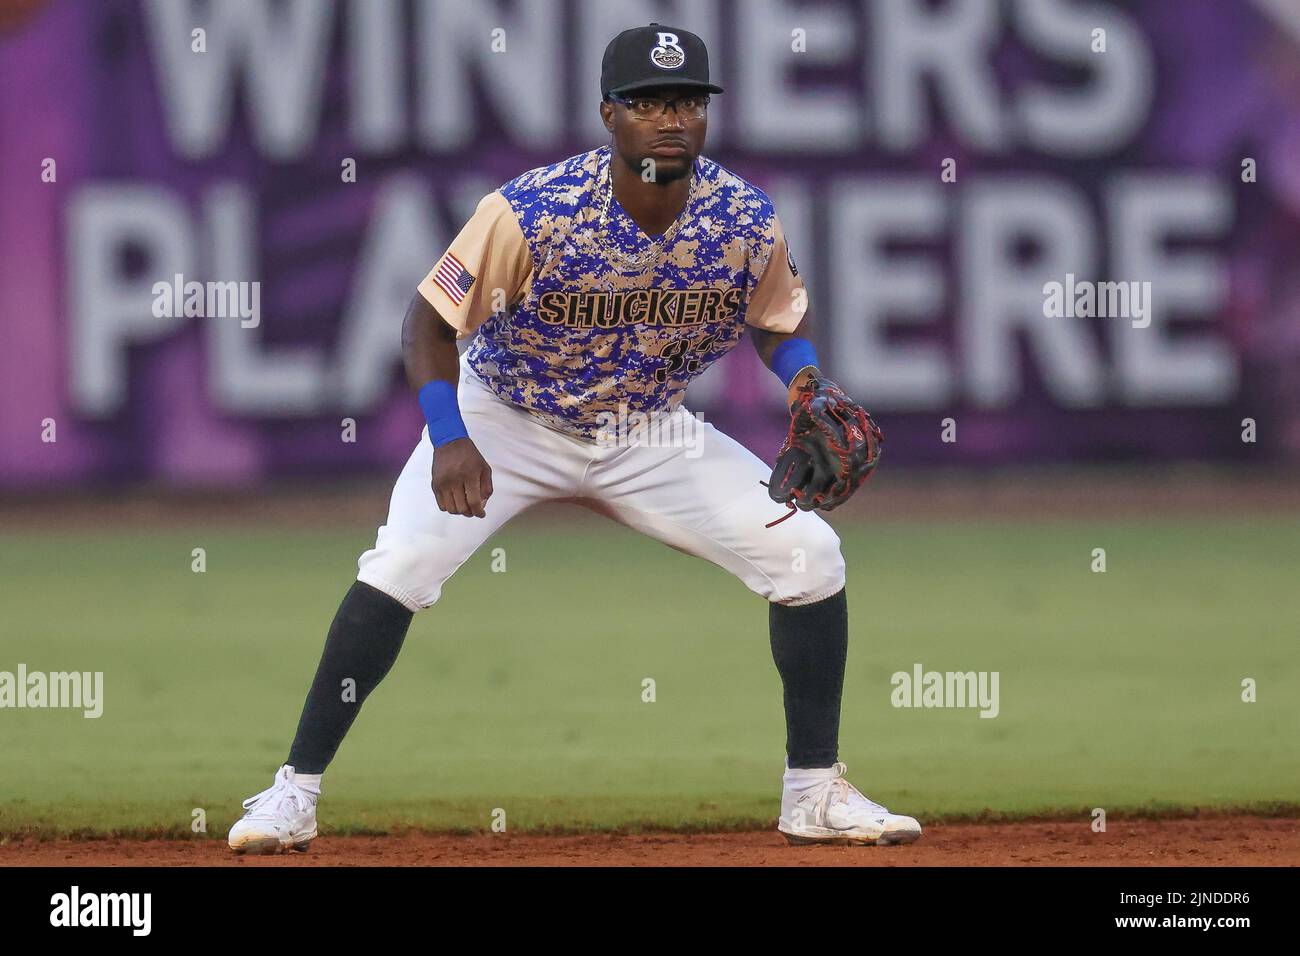 August 10, 2022: Biloxi Shuckers infielder Andruw Monasterio (33) in the ready position during an MiLB game between the Biloxi Shuckers and Rocket City Trash Pandas at MGM Park in Biloxi, Mississippi. Bobby McDuffie/CSM Stock Photo